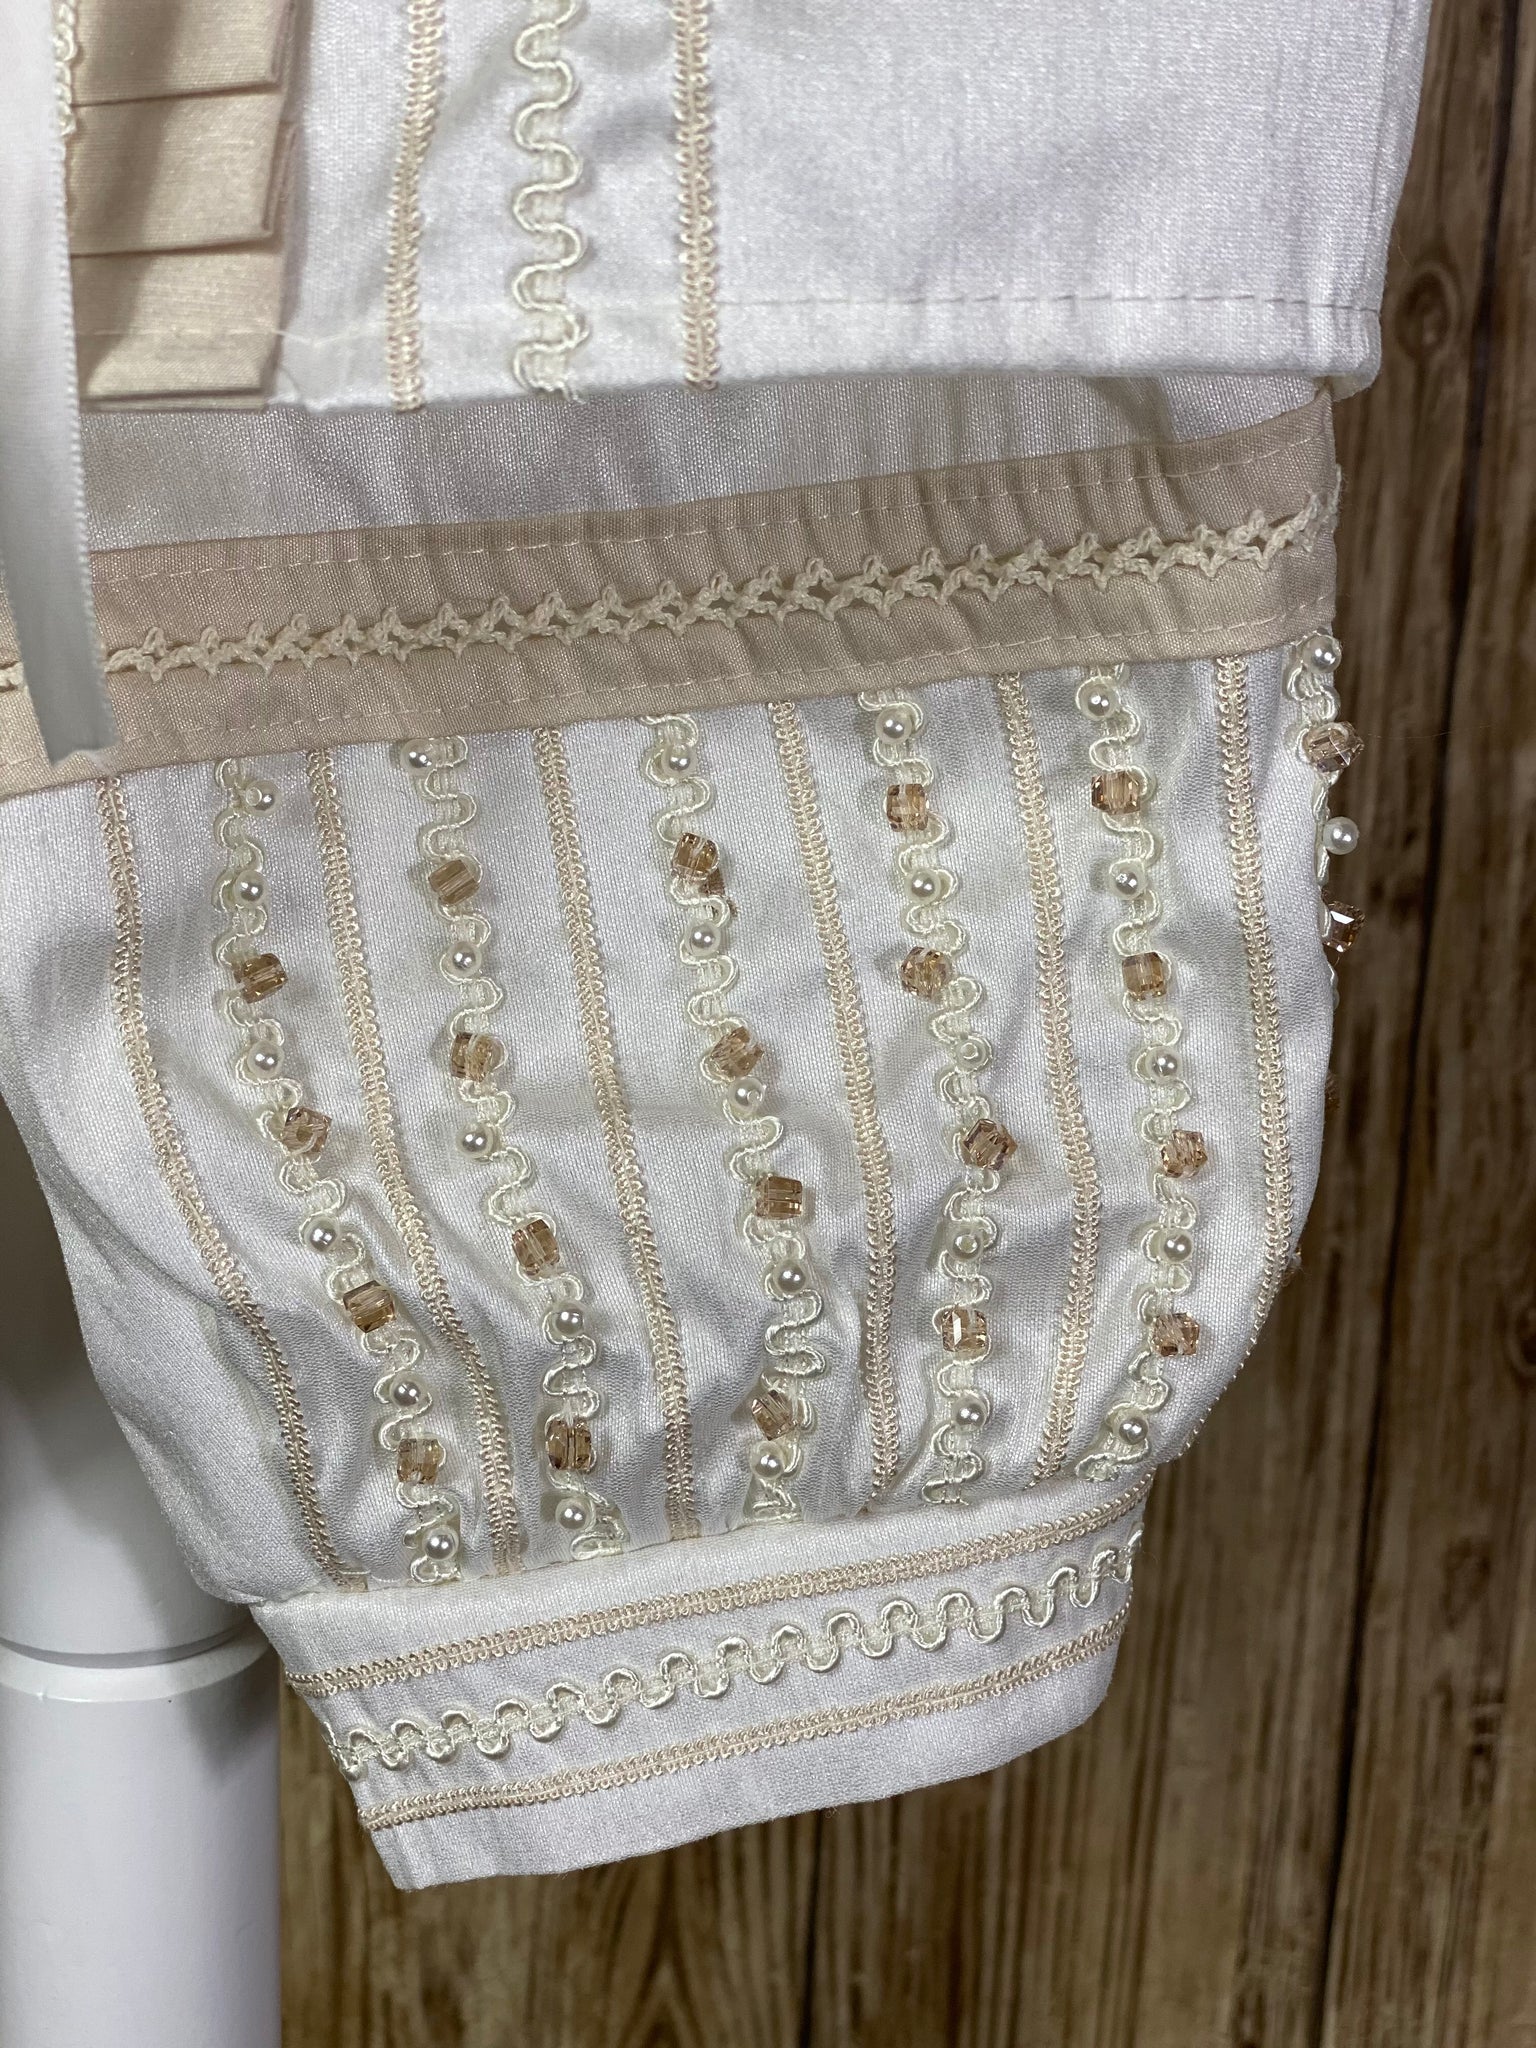 Ivory, size 6M  4-piece set including beret, mozzetta, shirt, suspender pants Vertical embroidery covering mozzetta, cummerbund, and pant legs Pearls and champagne jewels throughout embroidery Beige trim along mozzetta edge Intricate embroidered trim along mozzetta edge Ribbon closure on mozzetta Pleated beige detailing down center of shirt with rhinestone and pearl jewels Horizontal champagne rope detailing on pant cuffs Vertical champagne rope detailing on shirt center and beret